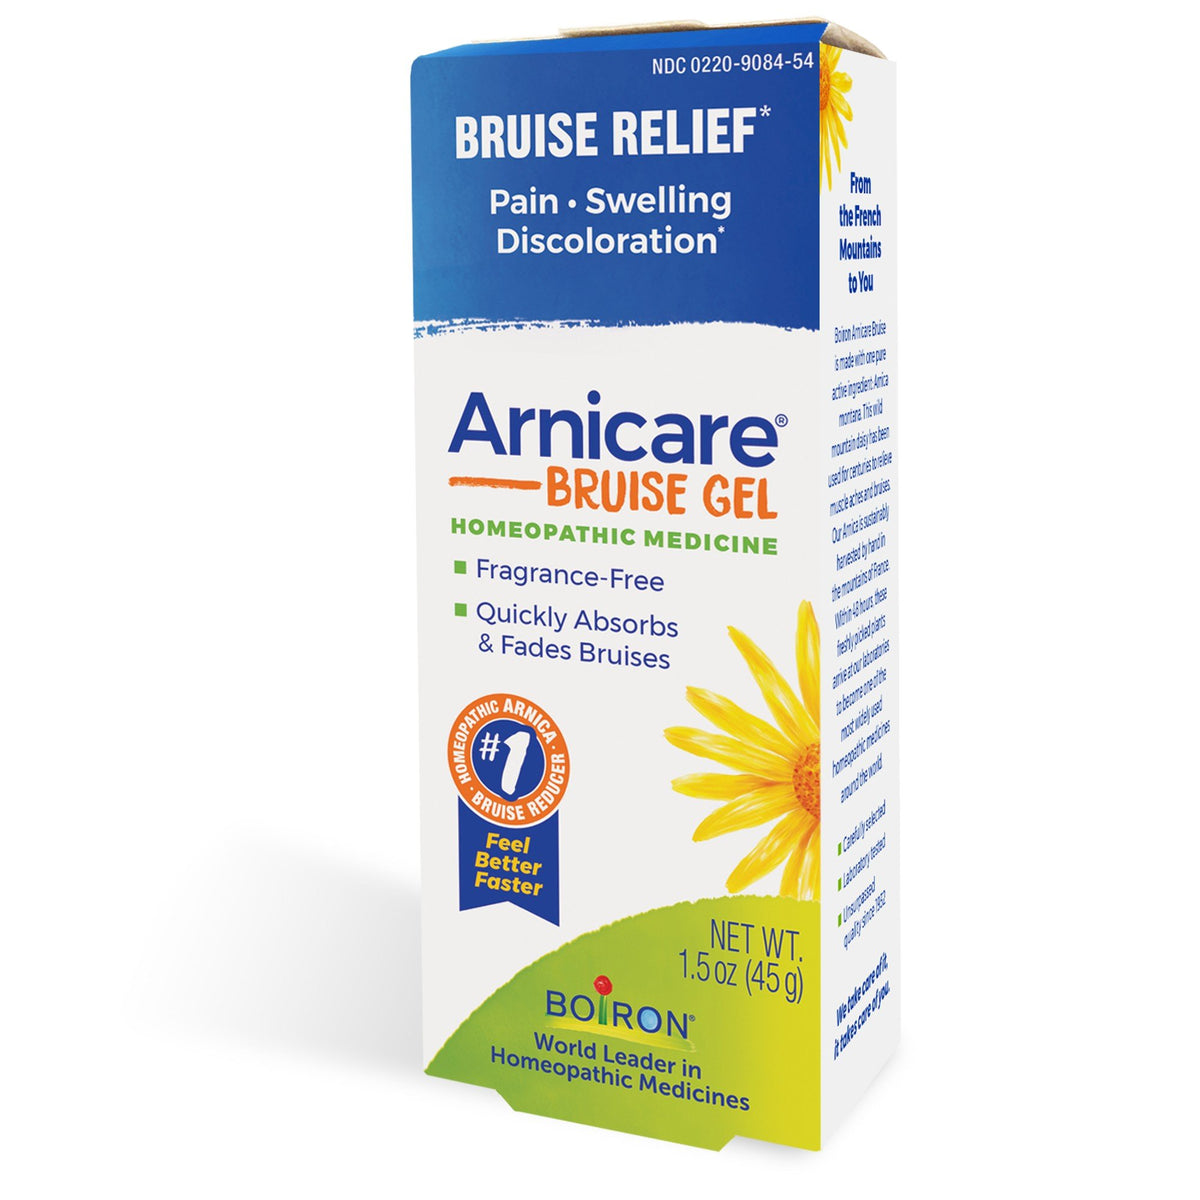 Boiron Arnicare Bruise Gel Homeopathic Medicine For Bruise Relief 1.5 oz Gel